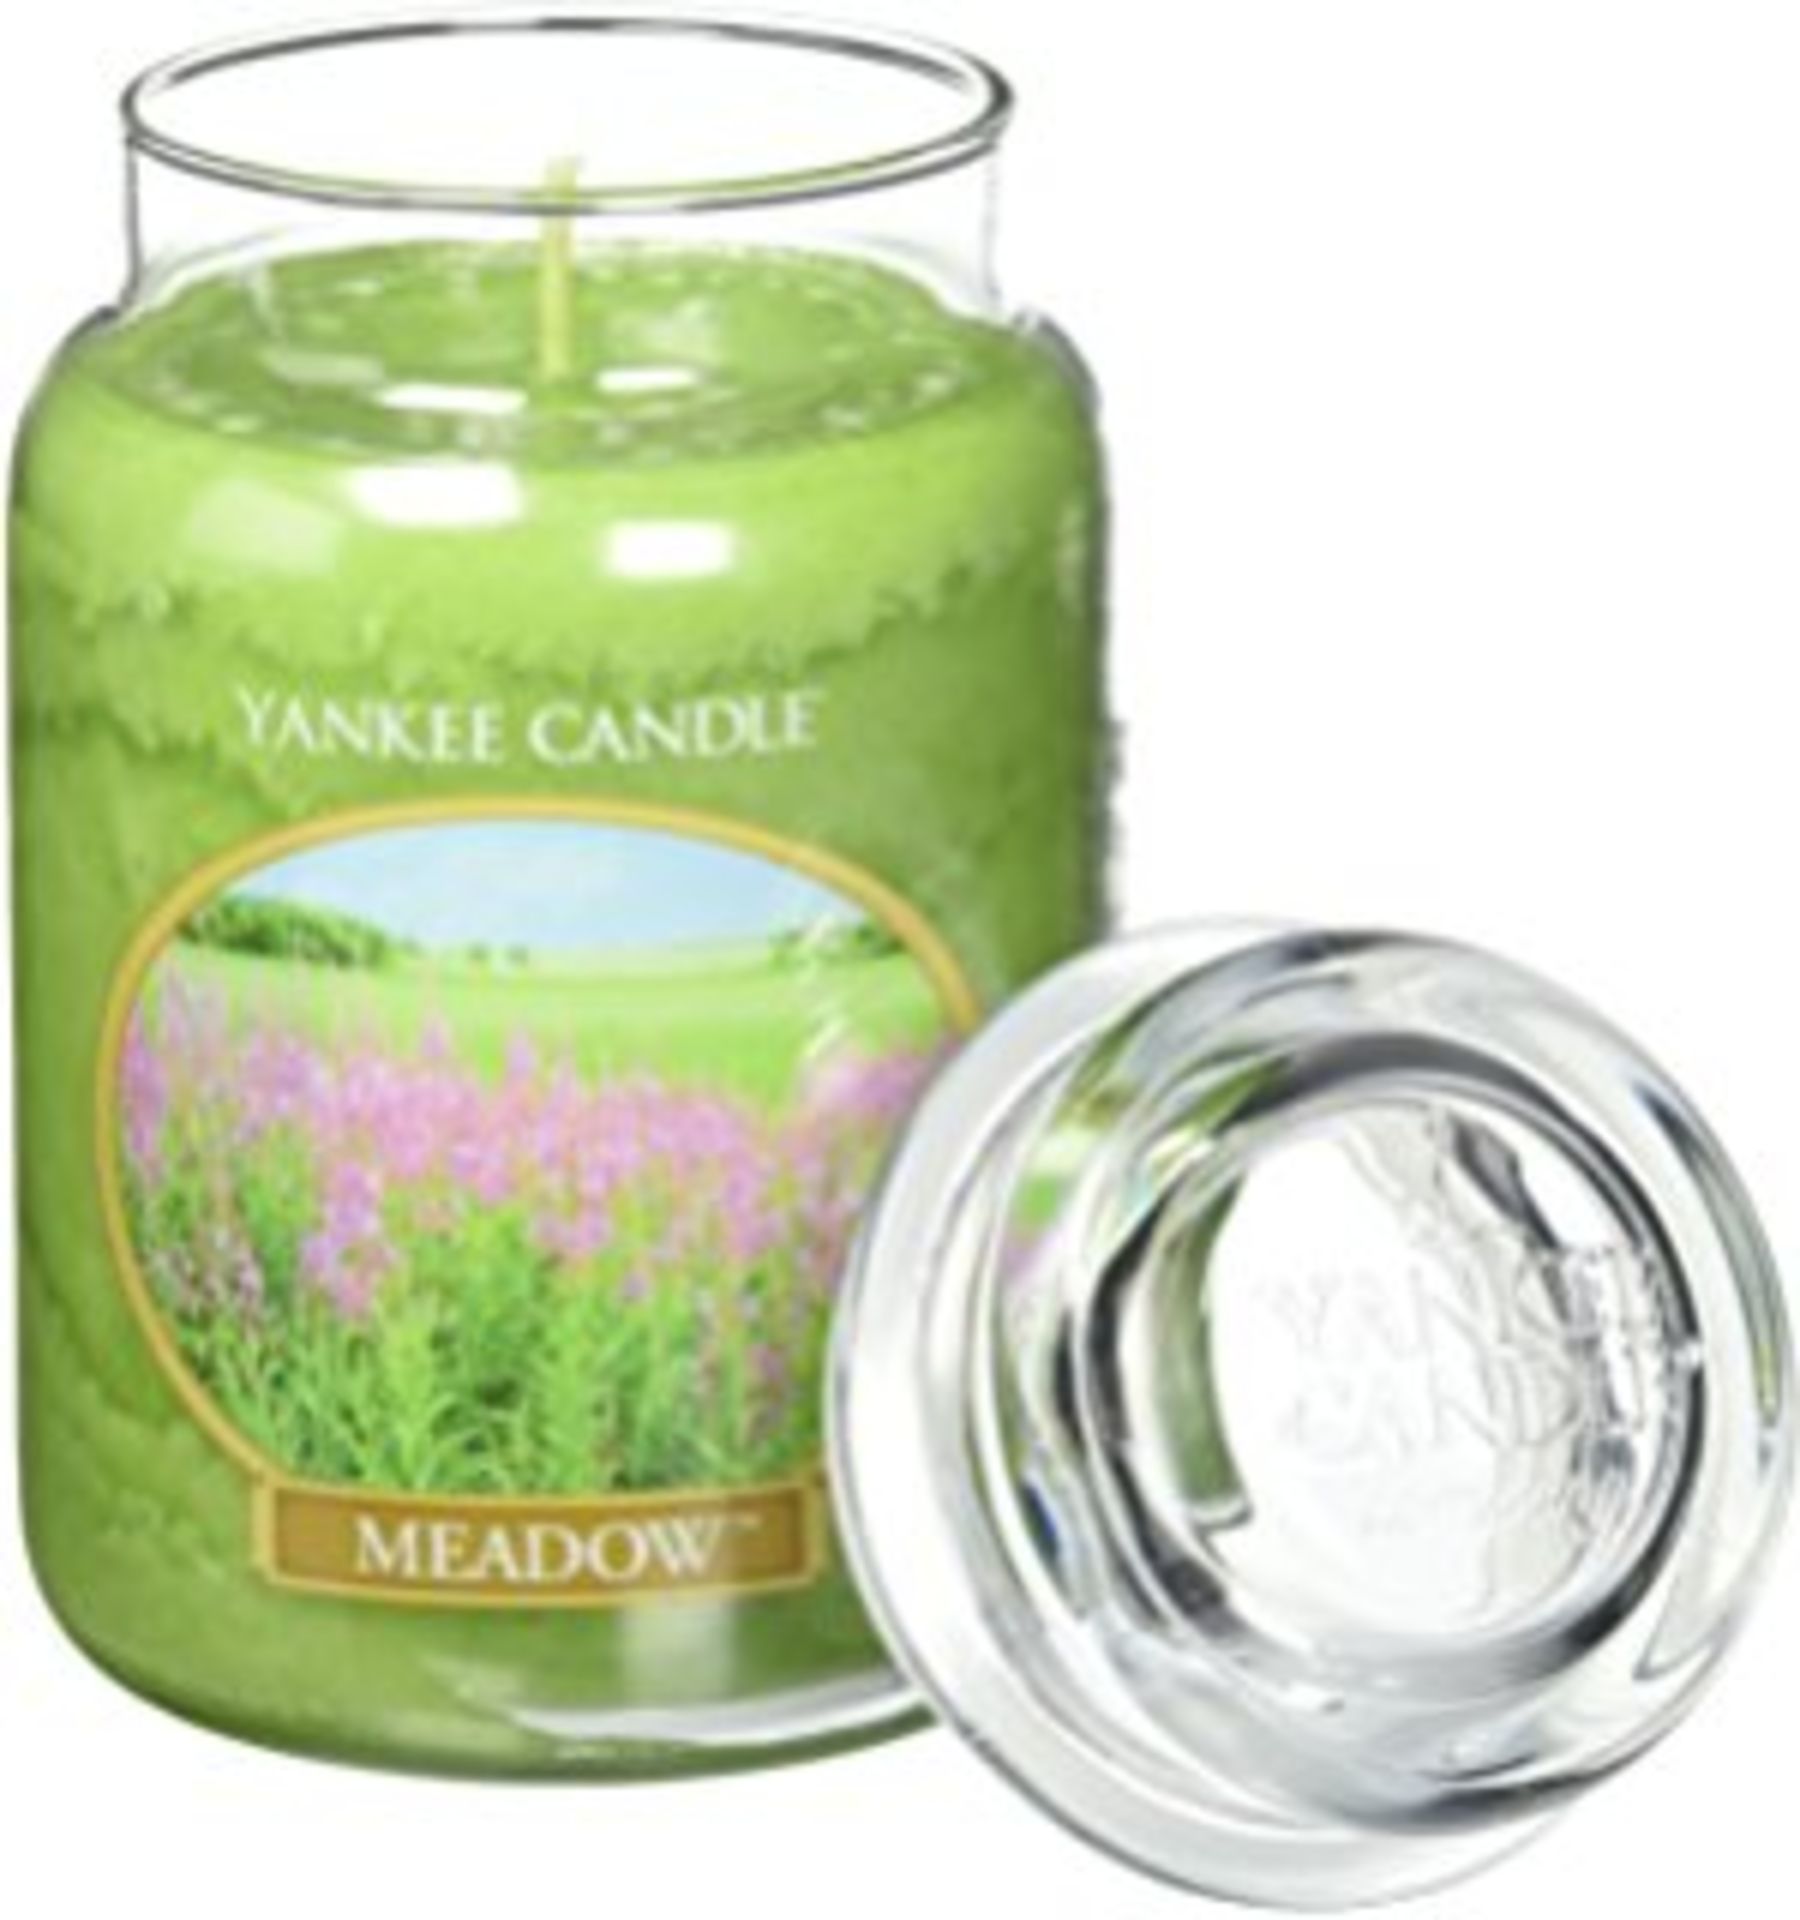 V *TRADE QTY* Brand New Large 623g Yankee Candle Jar Meadow ISP £29.95 (Ebay) X 24 YOUR BID PRICE TO